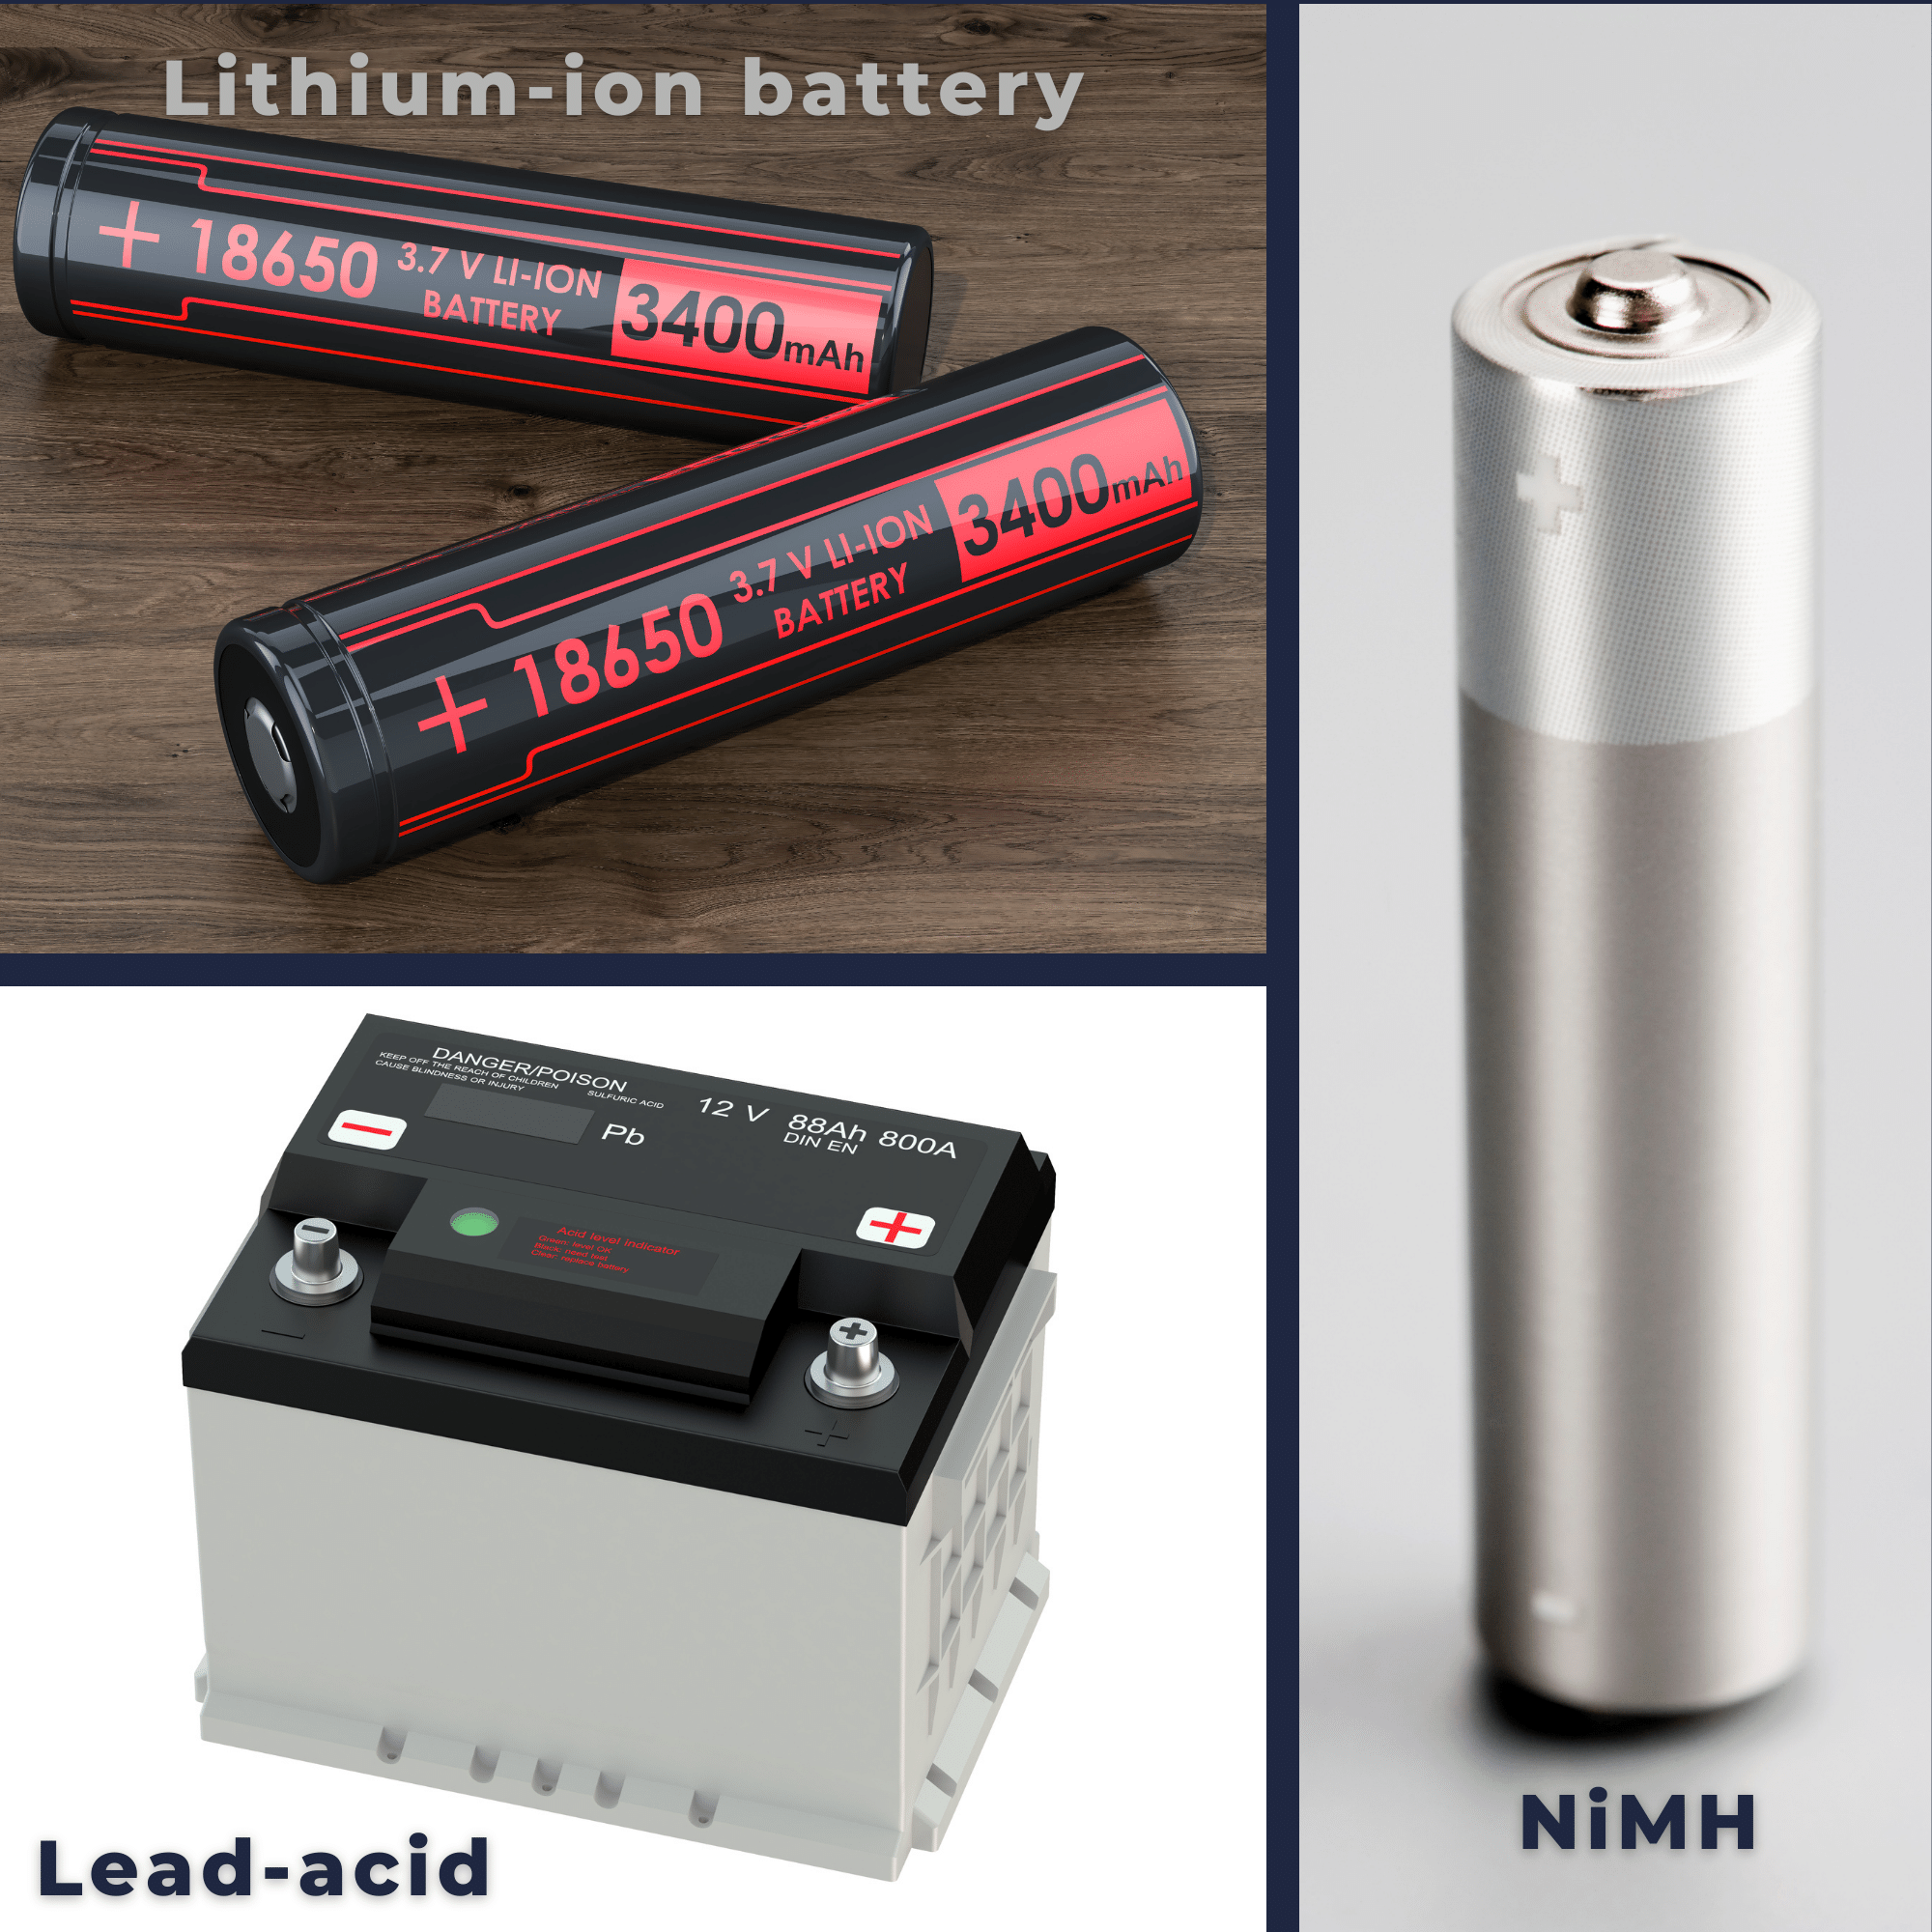 Types of Secondary Batteries